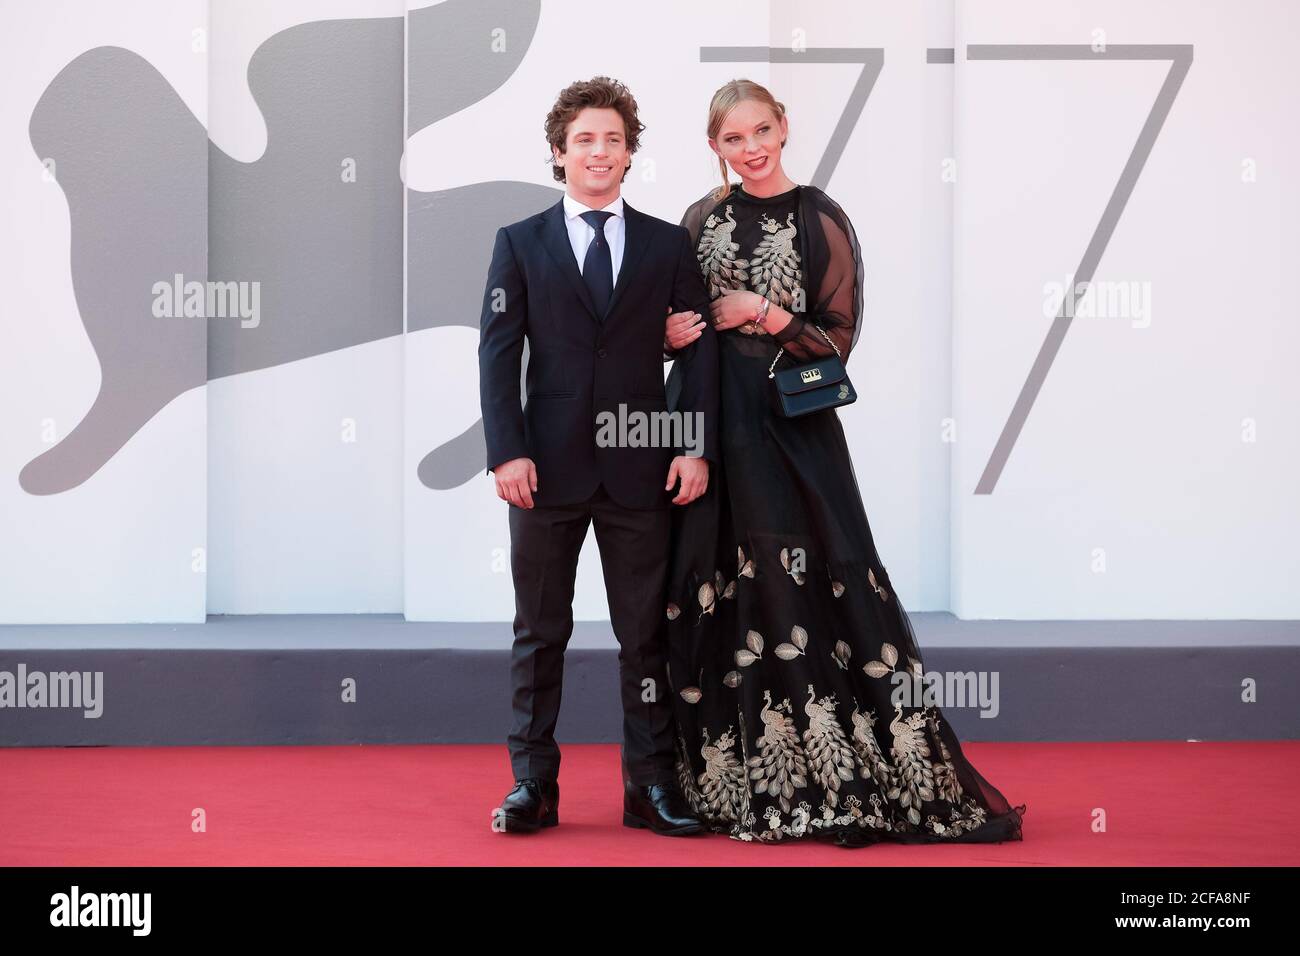 Palazzo del Cinema, Lido, Venice, Italy. 4th Sep, 2020. Prince Cosimo de Medici of Tuscany, Princess Elisa pose on the red carpet at the The Disciple. Picture by Credit: Julie Edwards/Alamy Live News Stock Photo